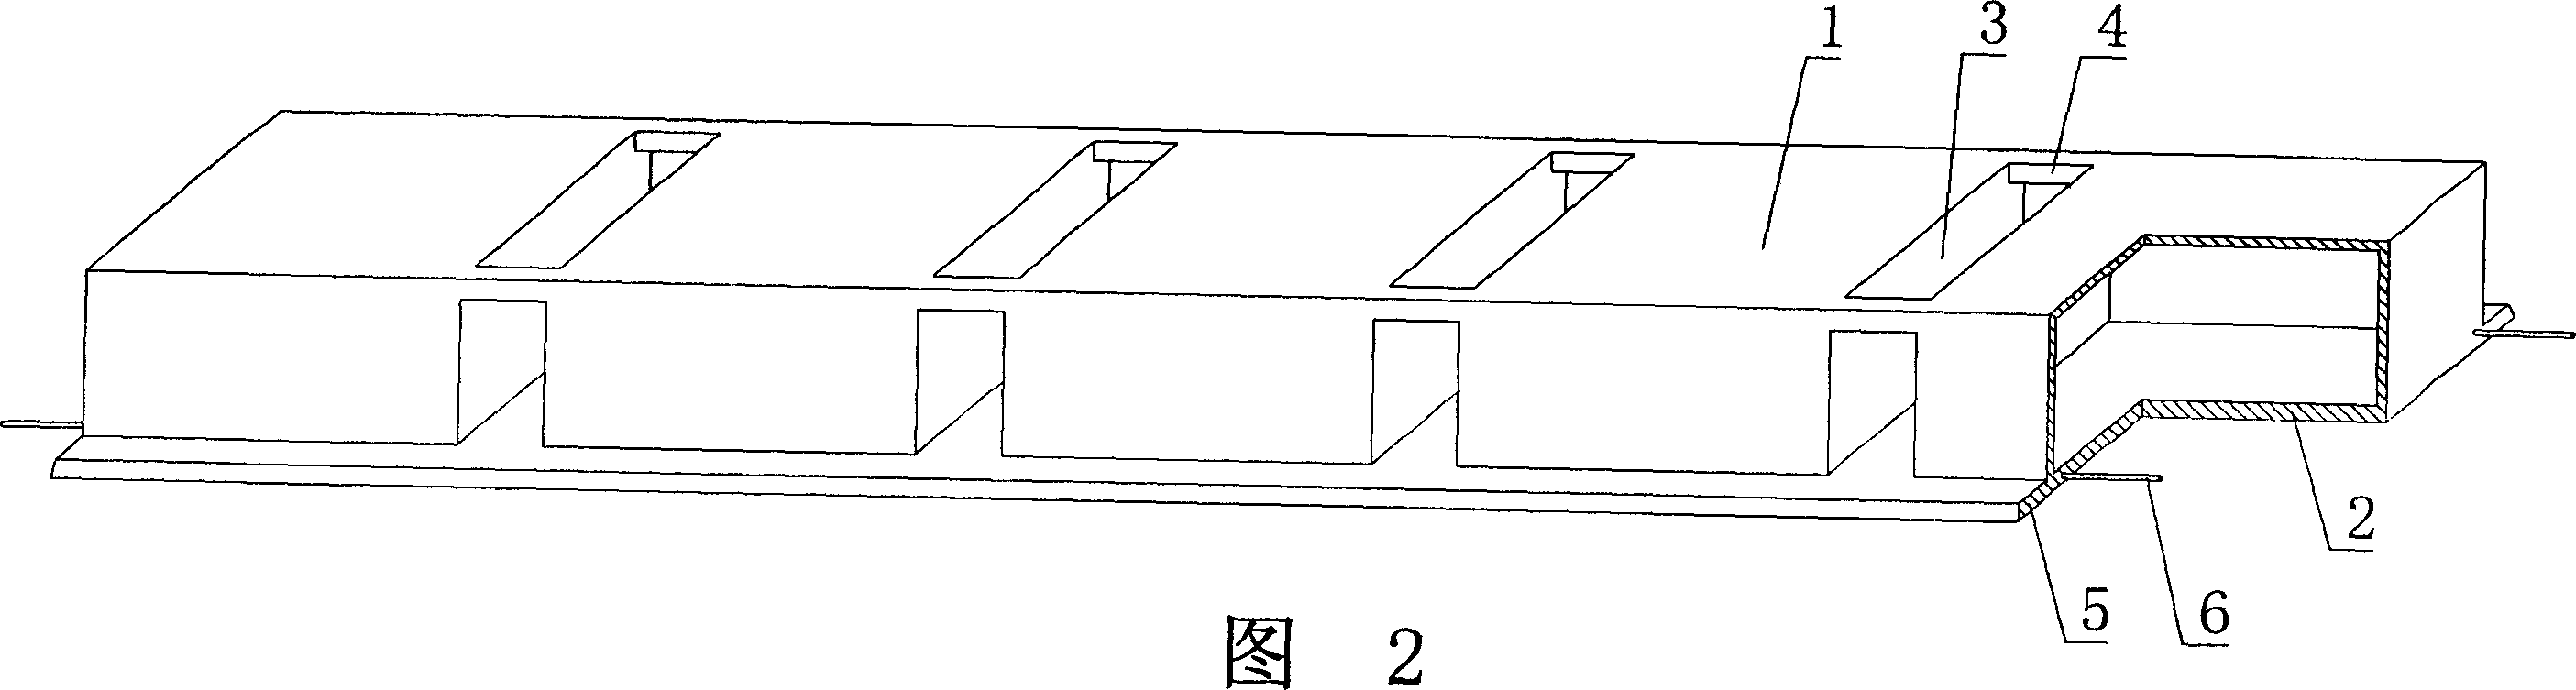 Cavity member for hollow slab